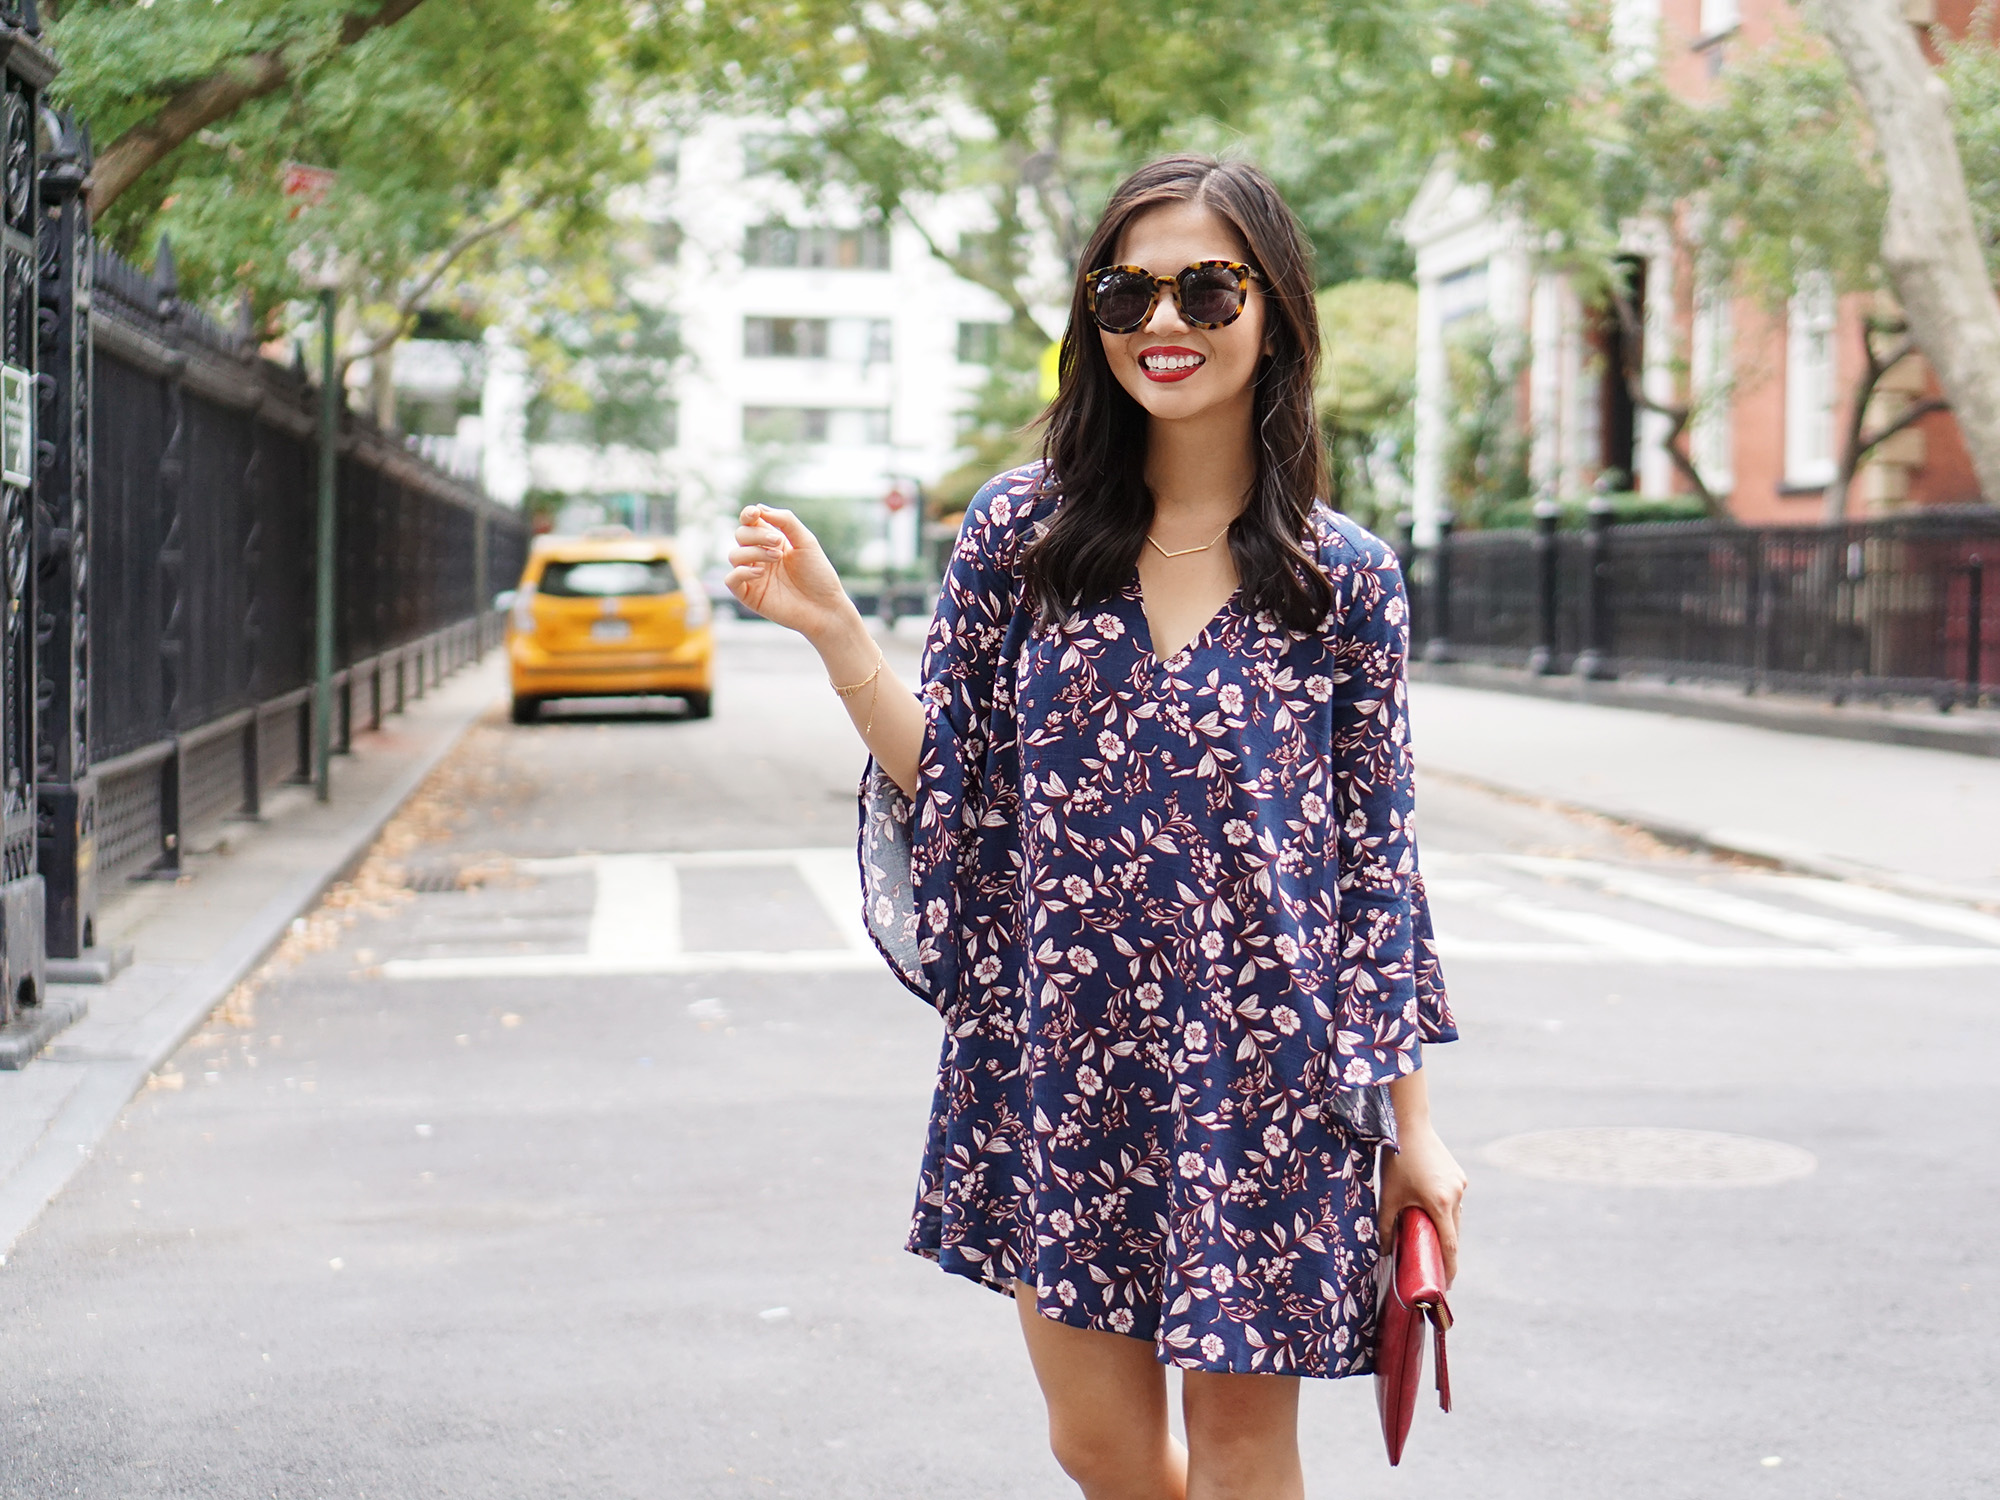 Skirt The Rules / Fall Floral Print Bell Sleeve Dress